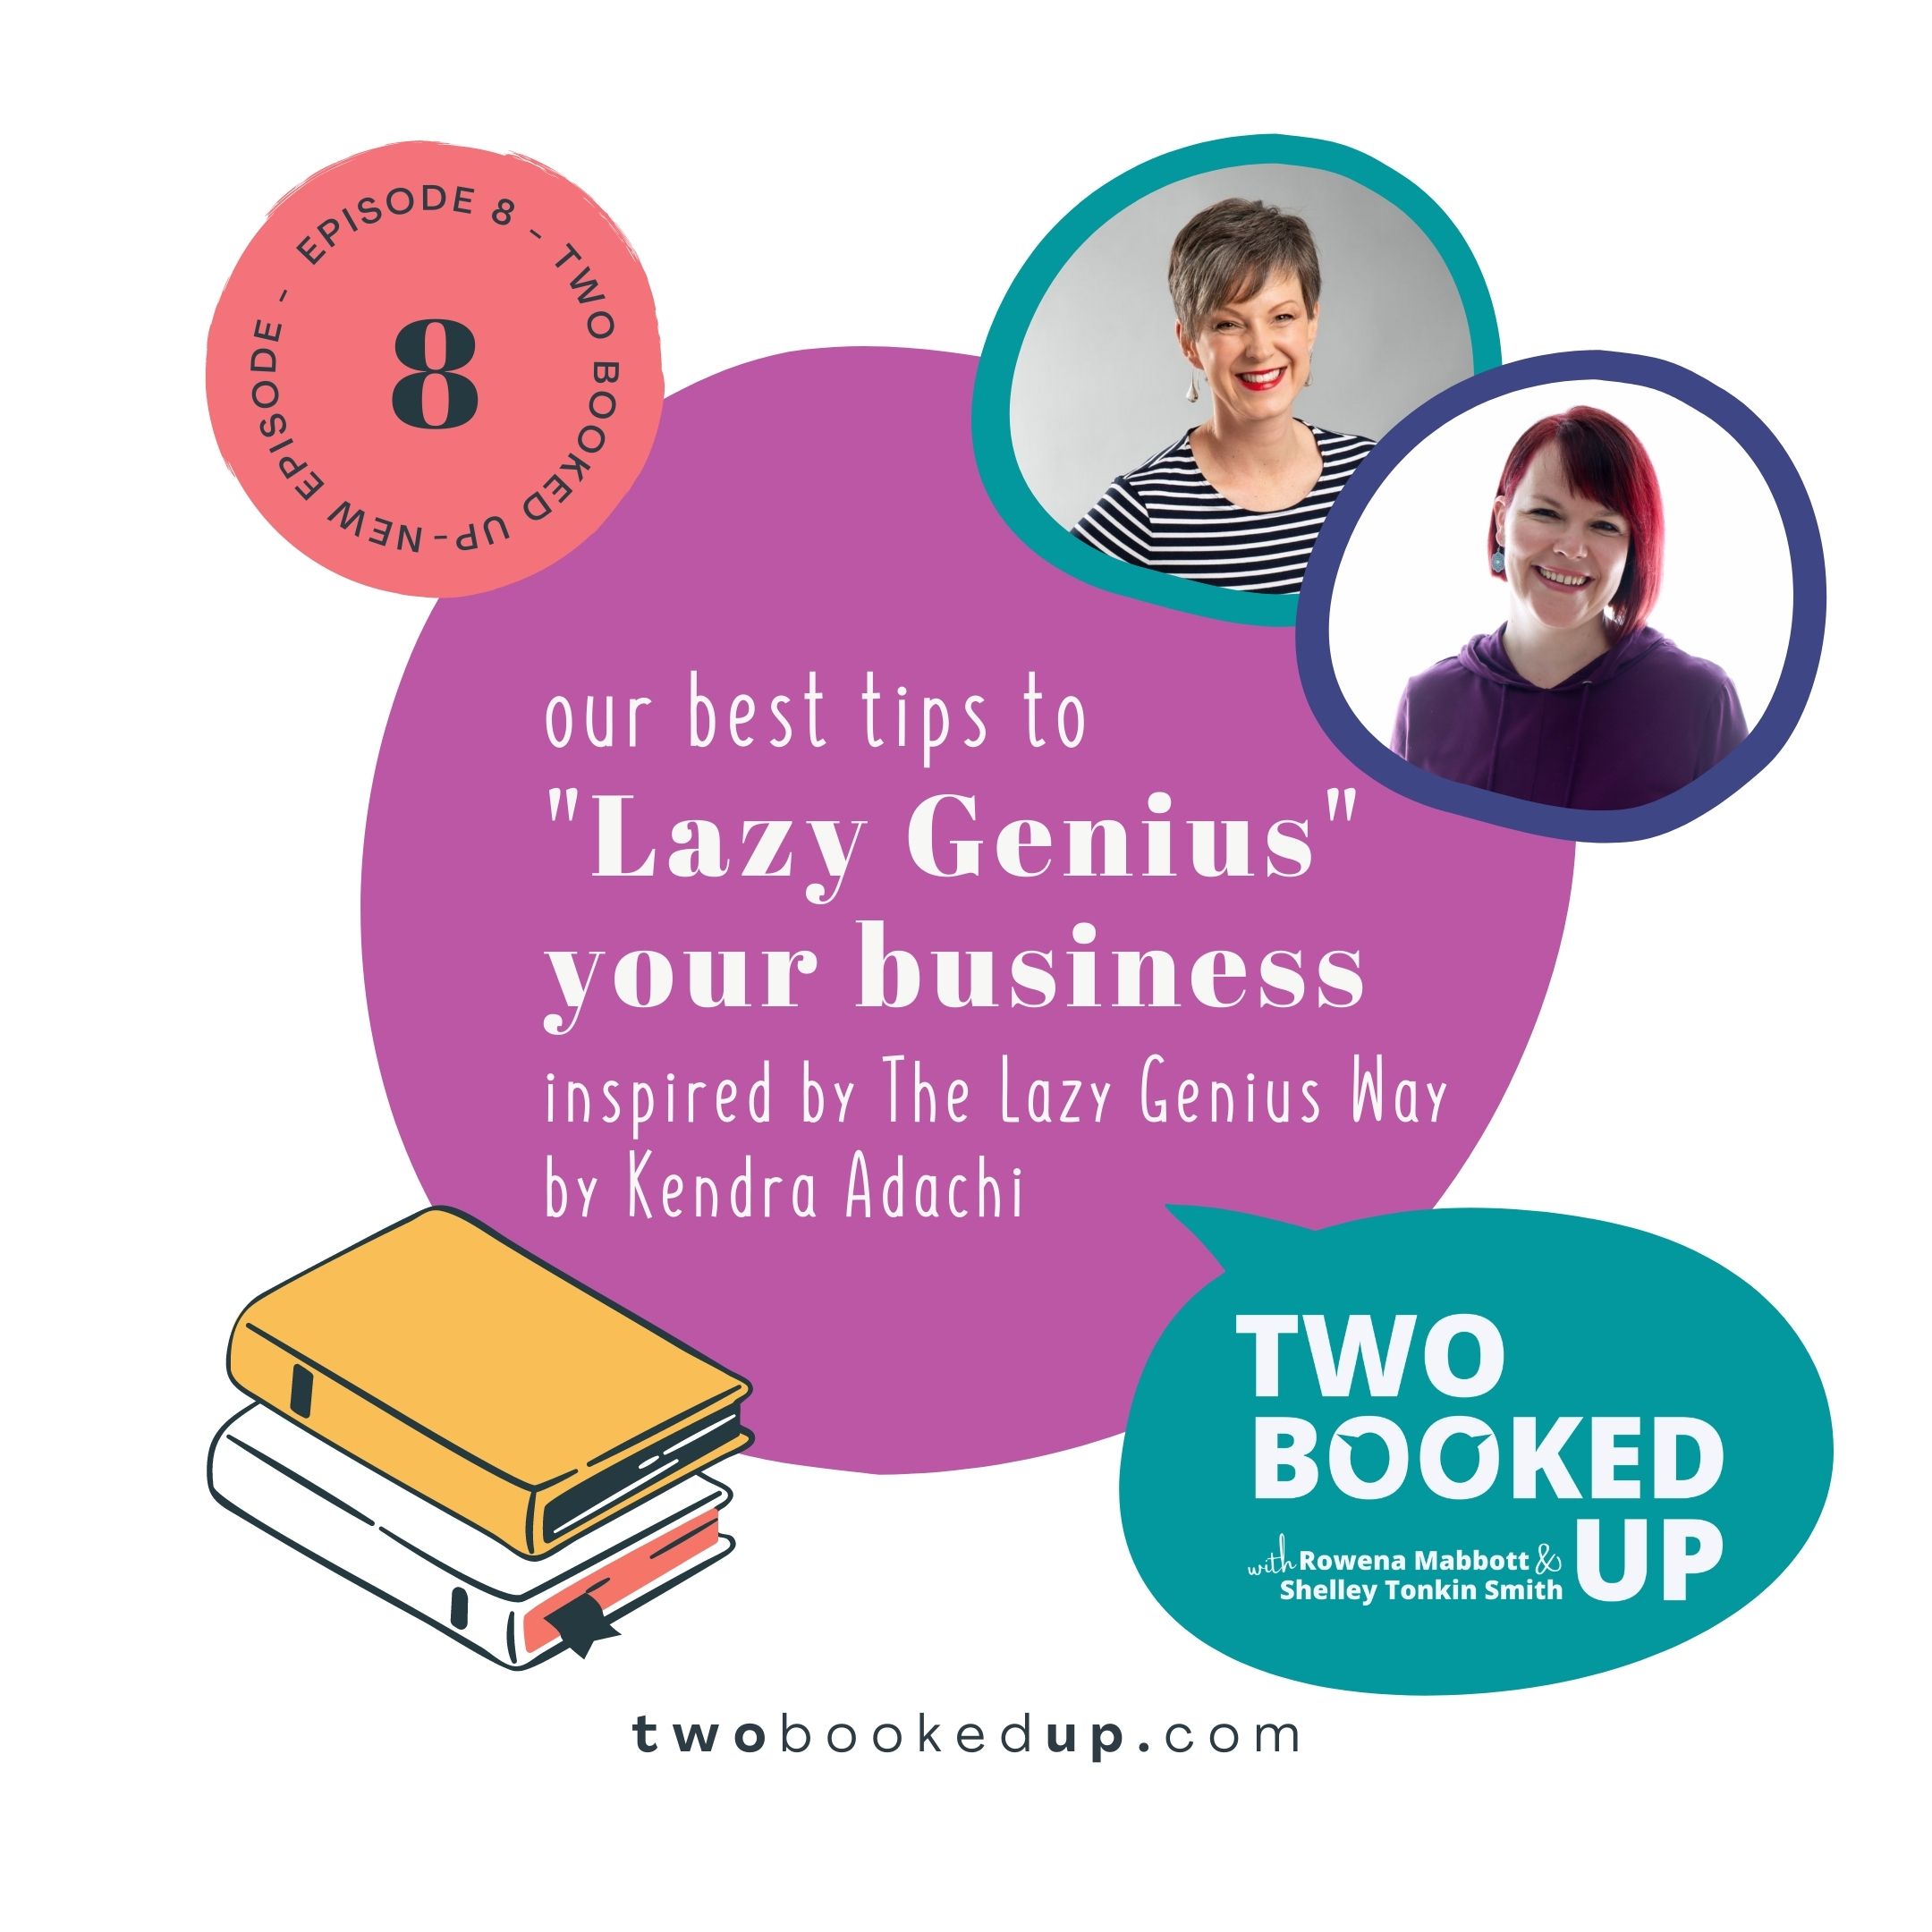 TBU#8 Our best tips to “Lazy Genius” your business (inspired by The Lazy Genius Way by Kendra Adachi)